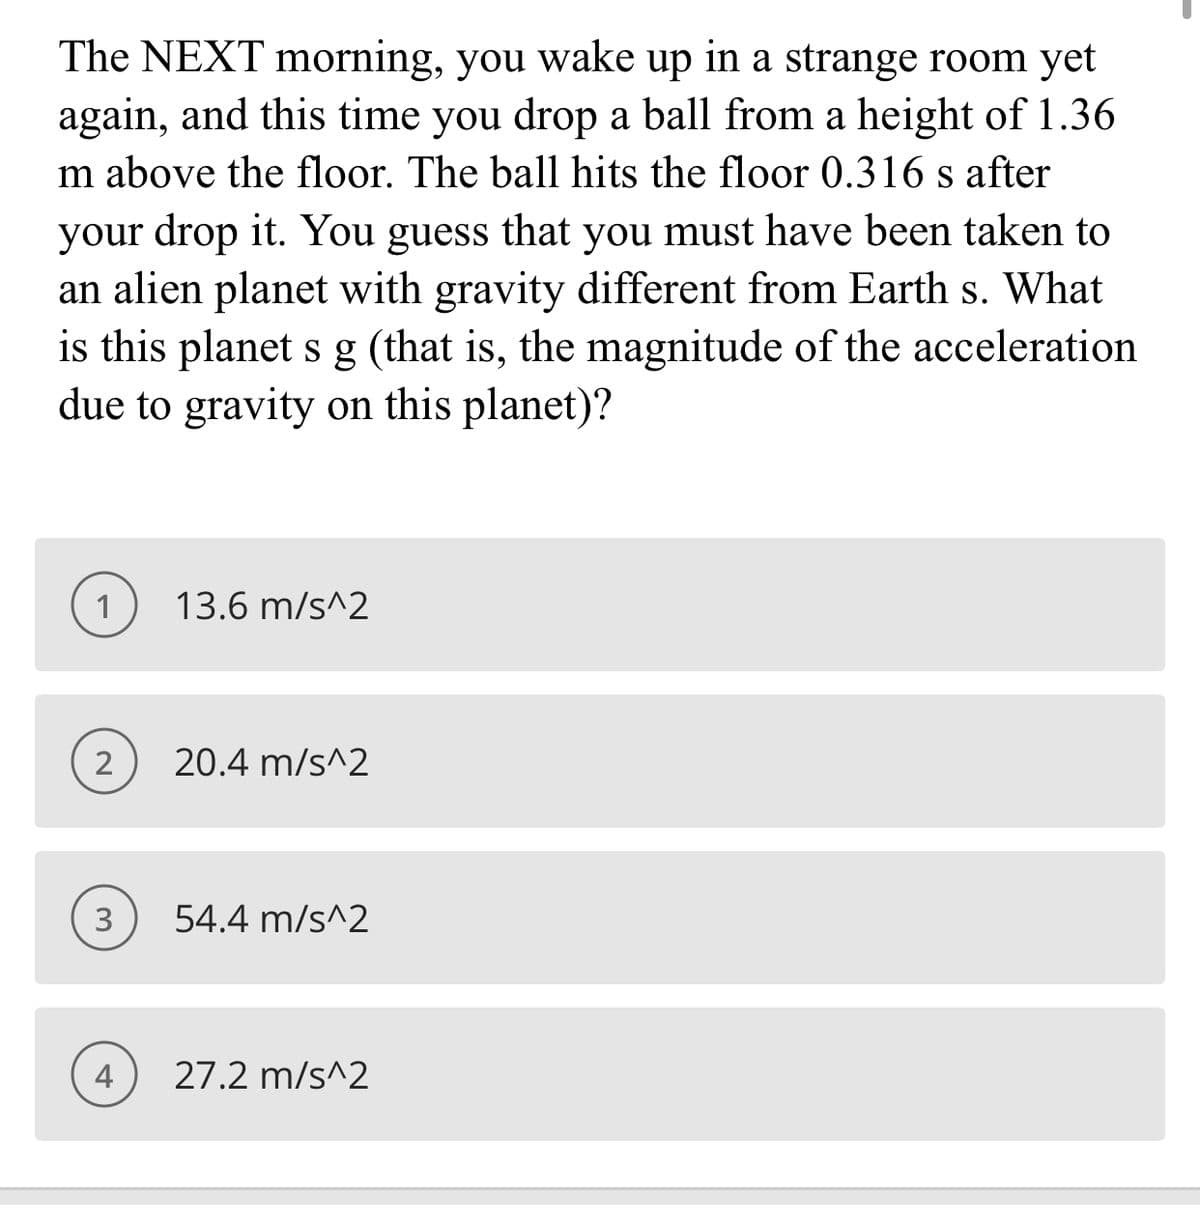 The NEXT morning, you wake up in a strange room yet
again, and this time you drop a ball from a height of 1.36
m above the floor. The ball hits the floor 0.316 s after
your drop it. You guess that you must have been taken to
an alien planet with gravity different from Earth s. What
is this planet s g (that is, the magnitude of the acceleration
due to gravity on this planet)?
1
13.6 m/s^2
2
20.4 m/s^2
54.4 m/s^2
4
27.2 m/s^2
